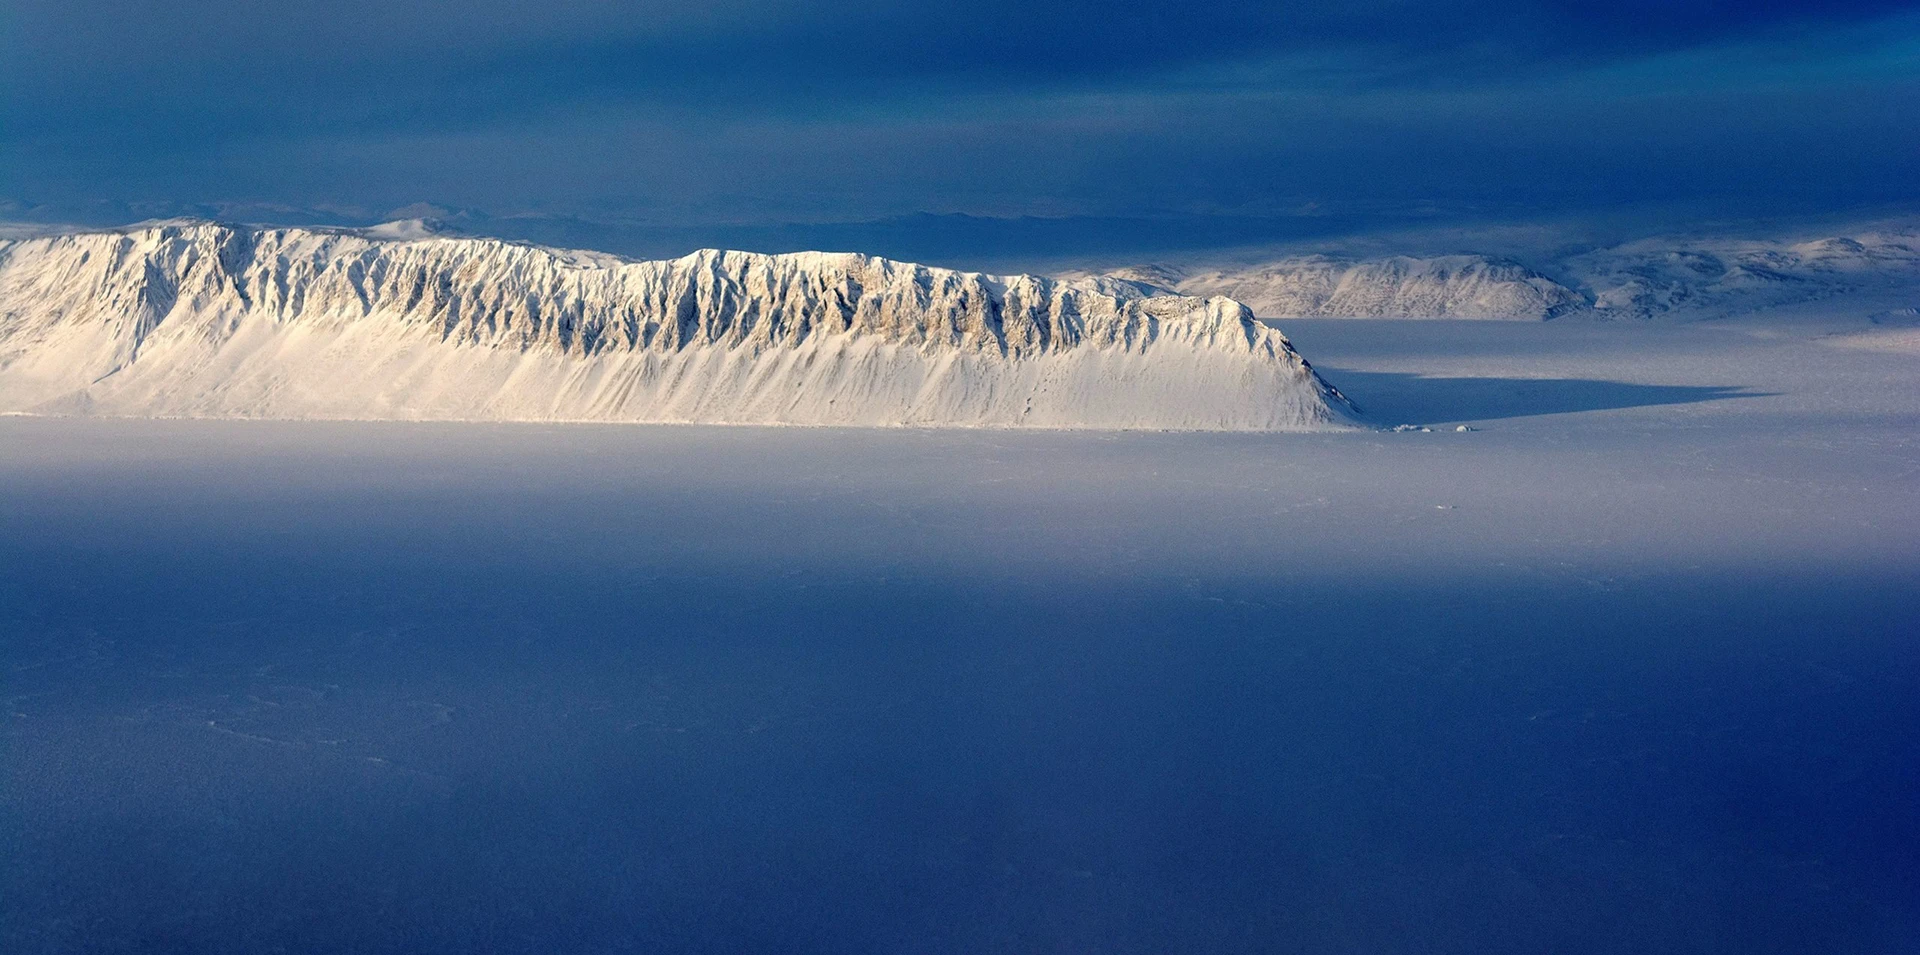 Canada's last fully intact ice shelf has just collapsed